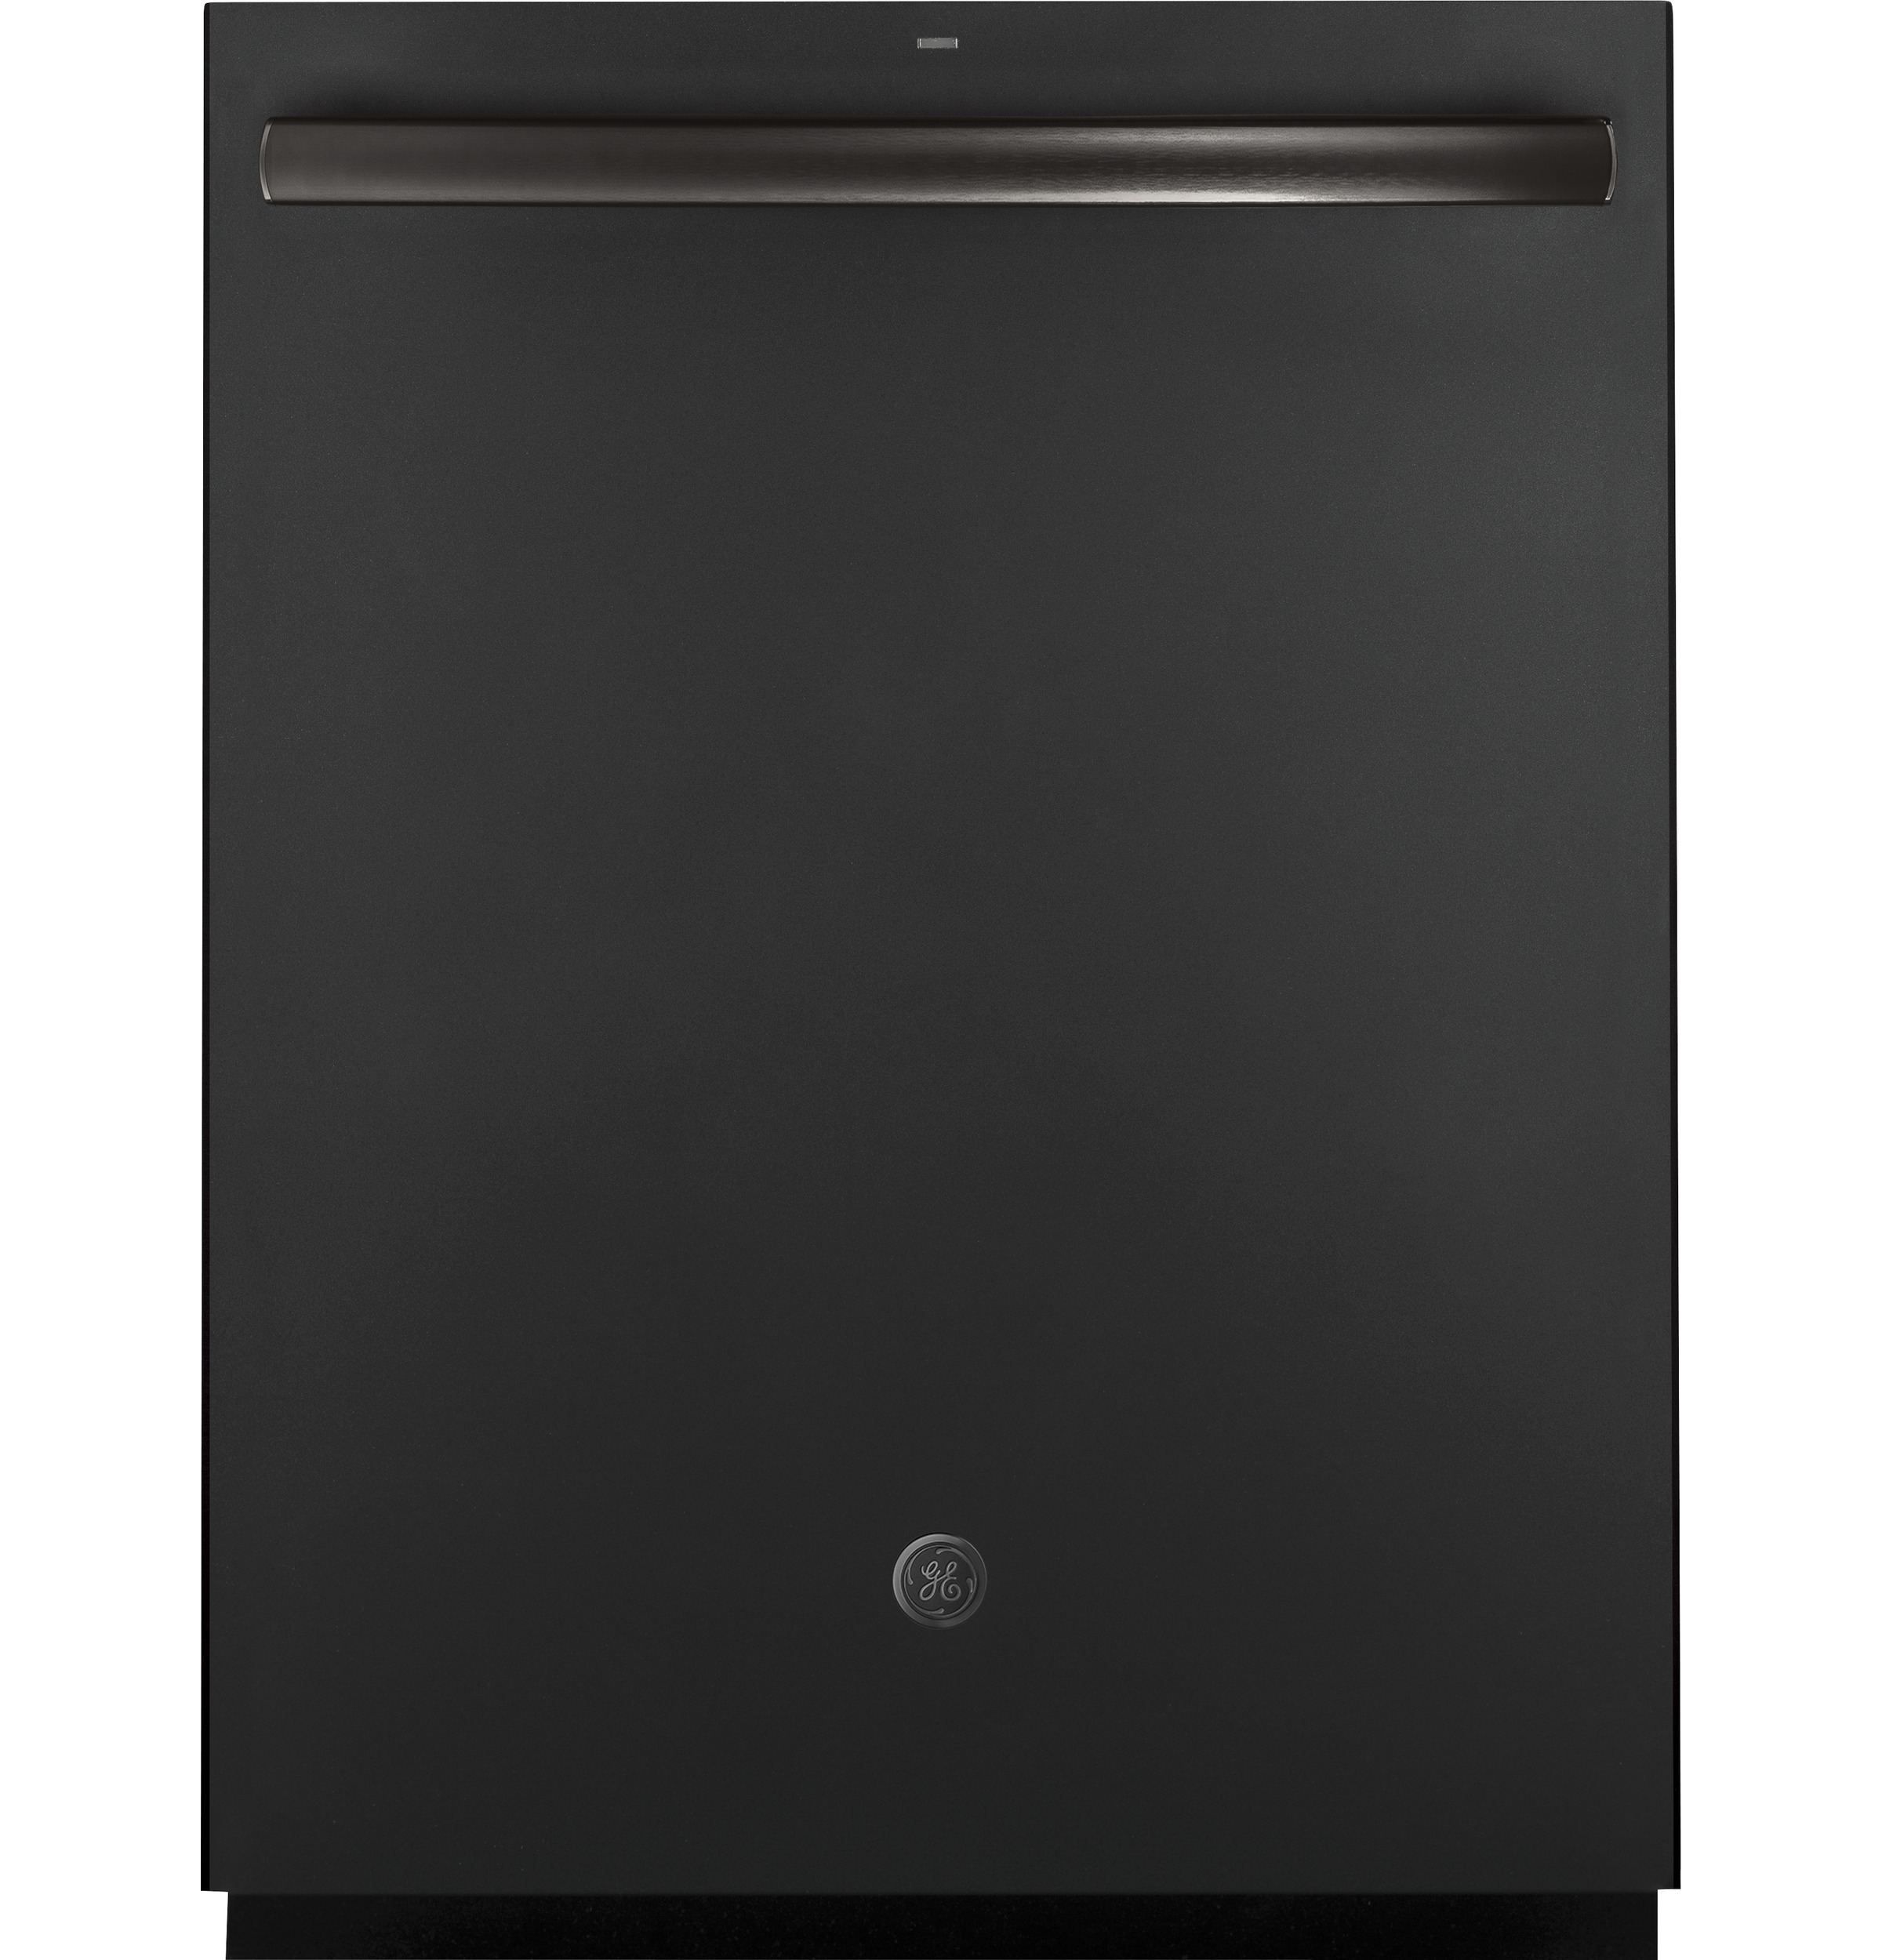 Adora series by GE® Stainless Steel Interior Dishwasher with Hidden Controls